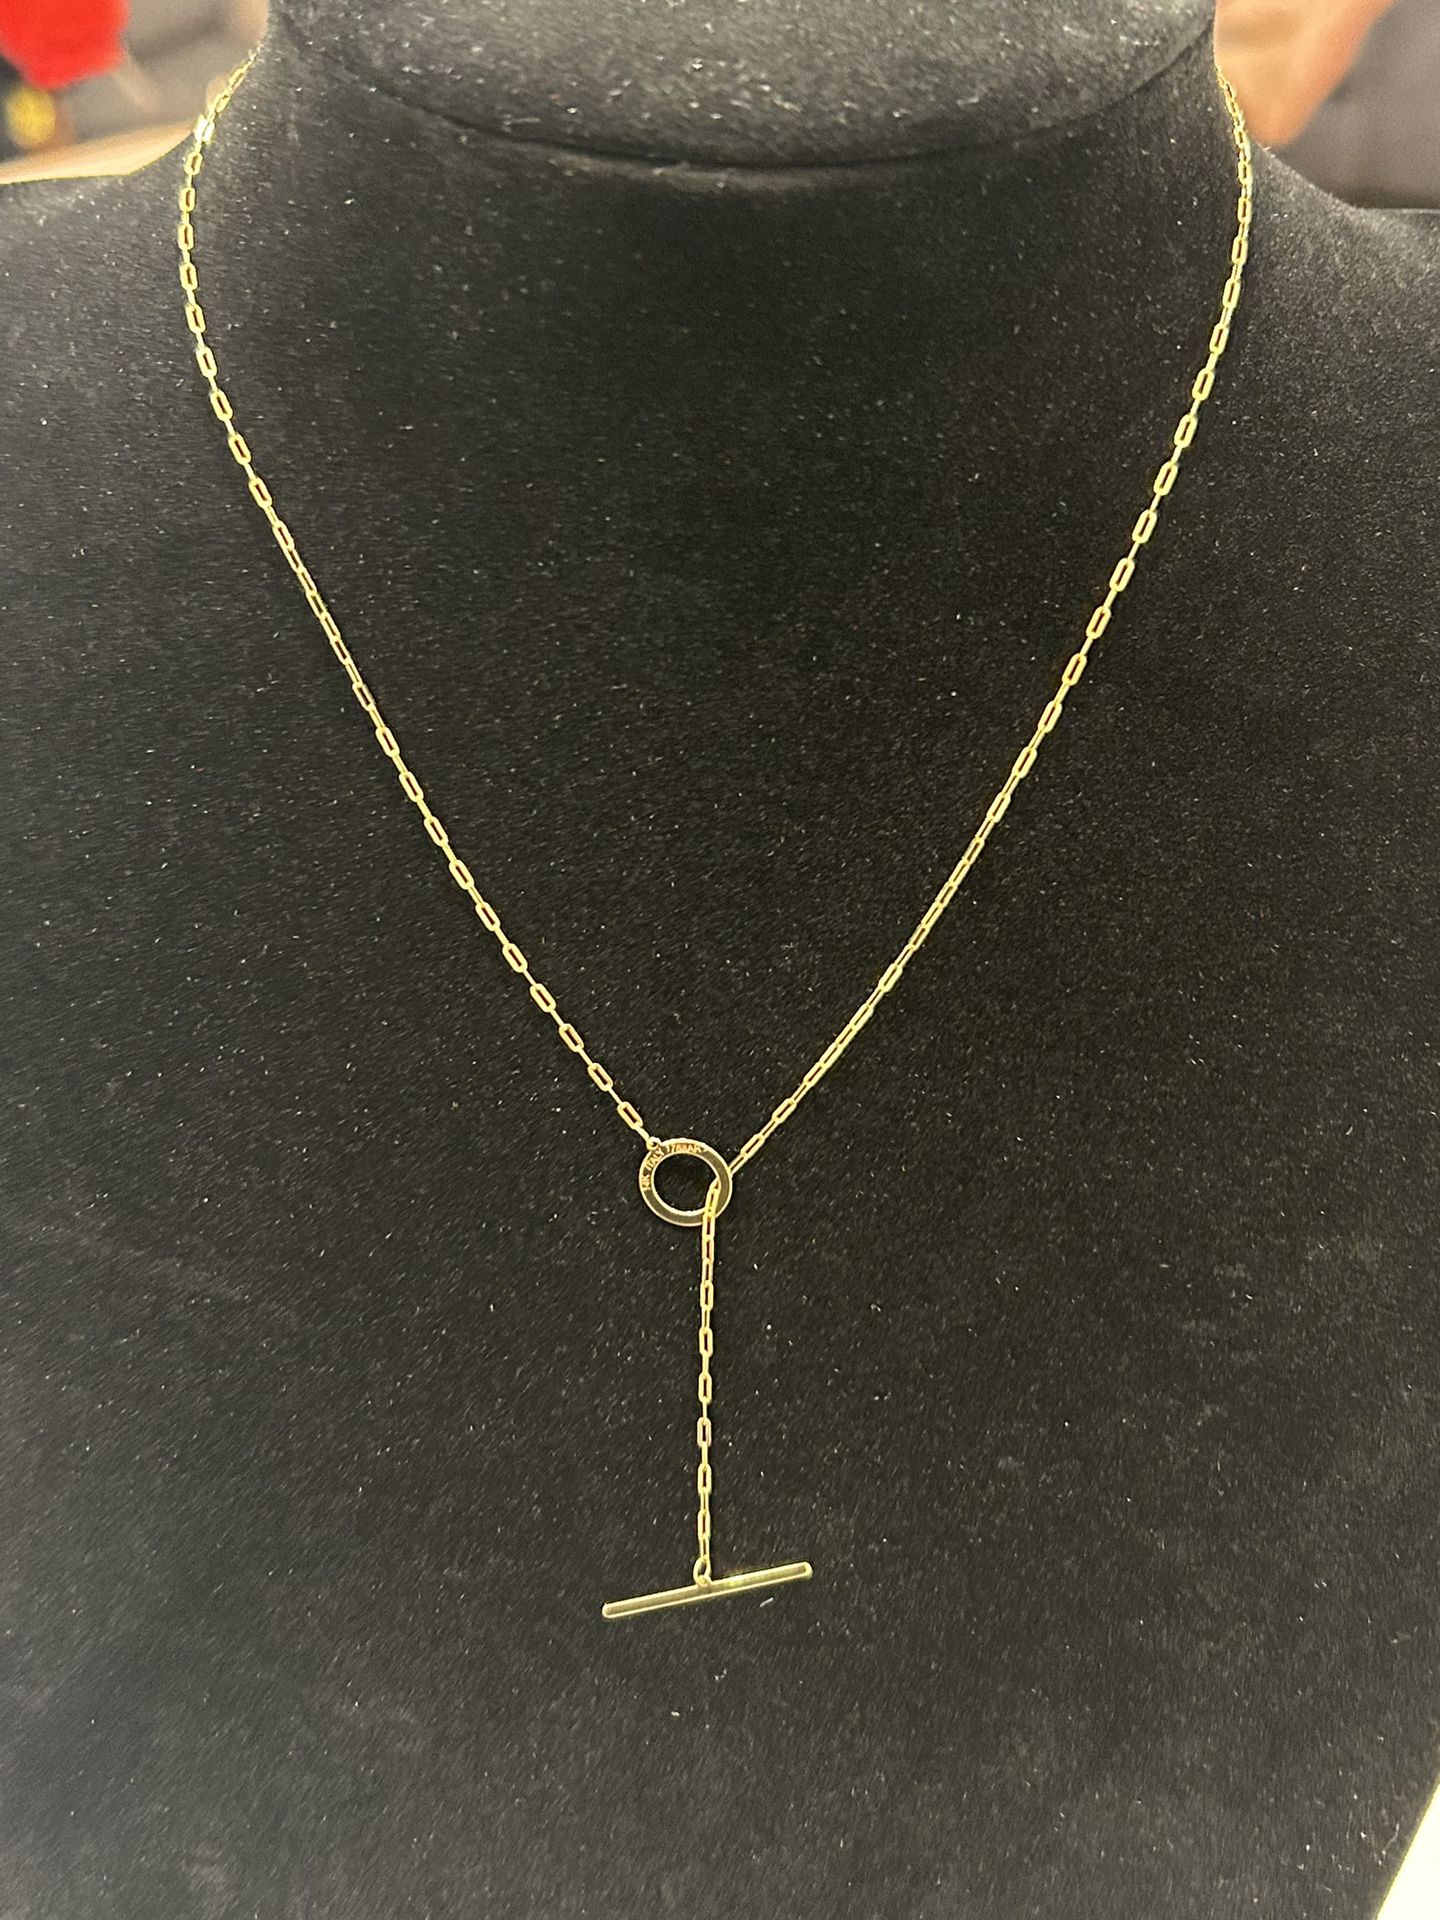 14k paper clip real gold necklace